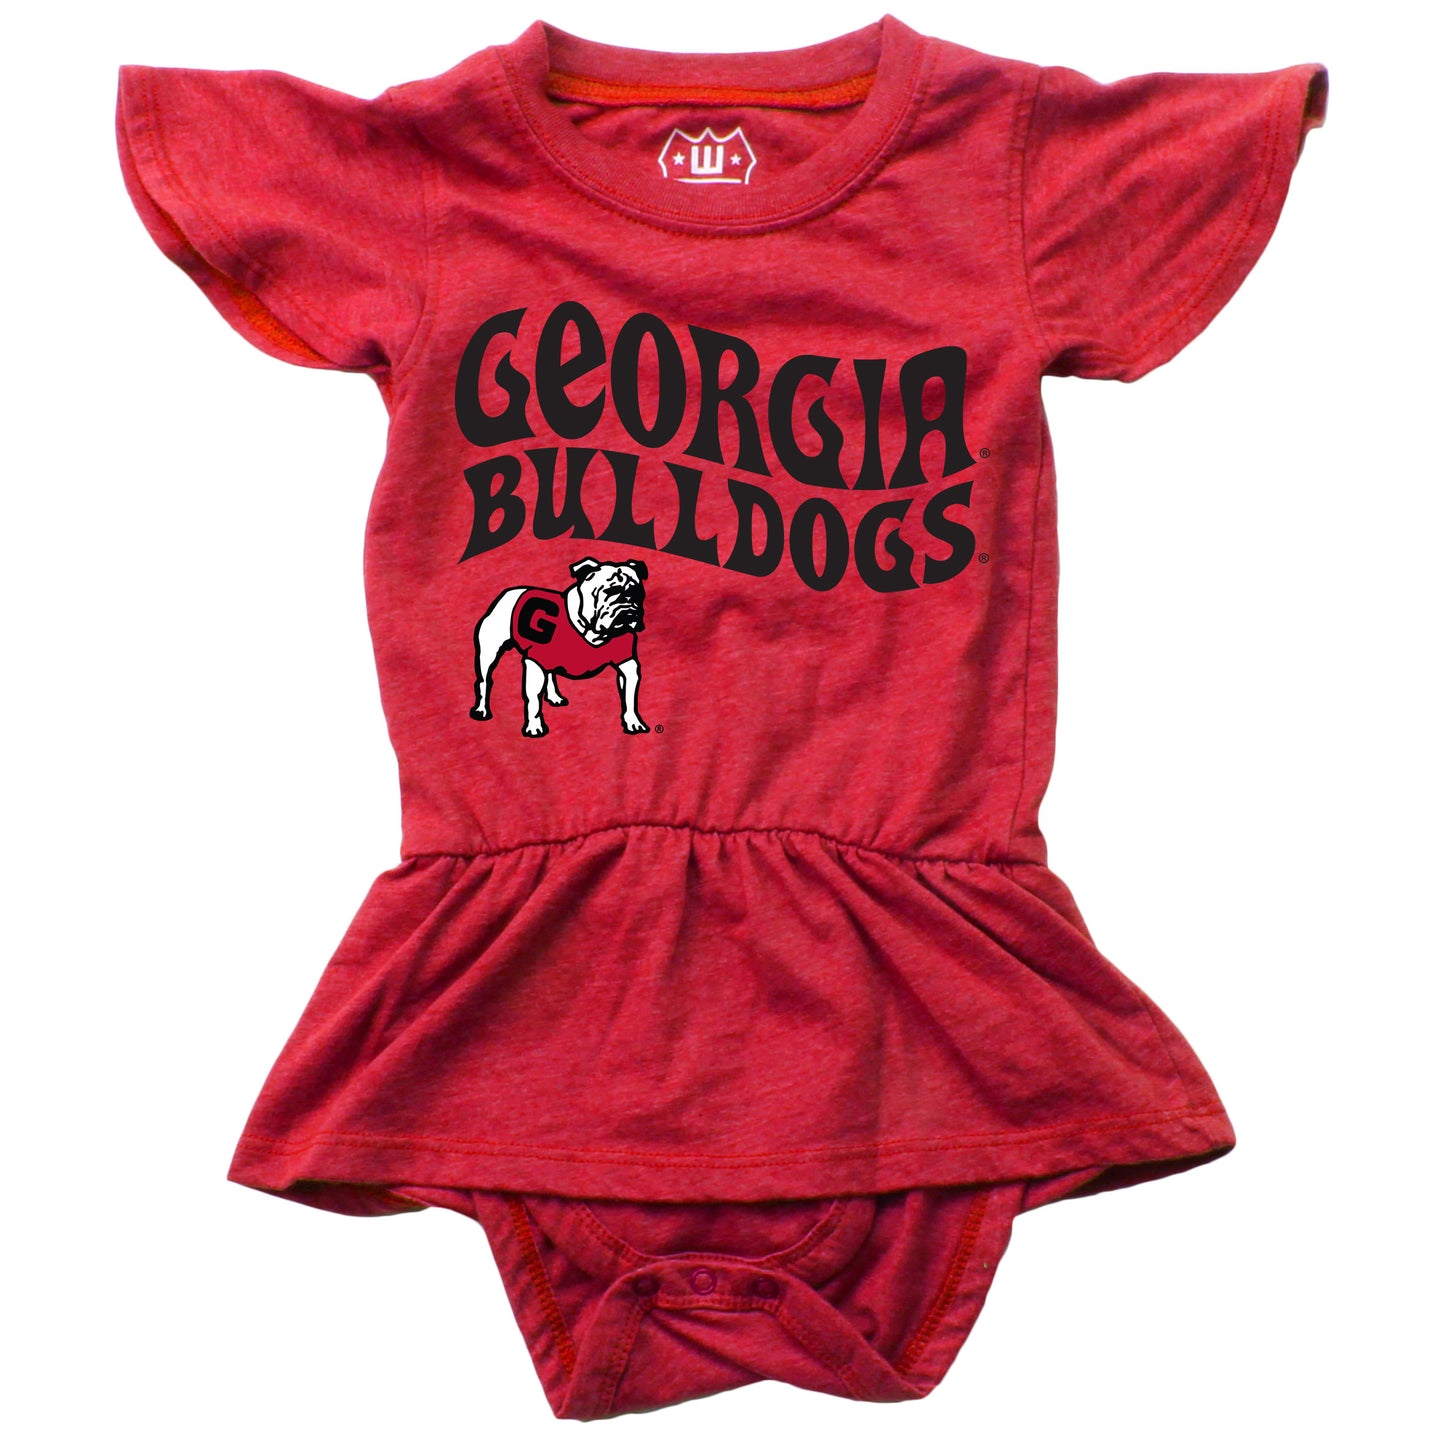 Georgia Bulldogs Wes and Willy Baby Girls College Team One Piece Hopper Skirt Red